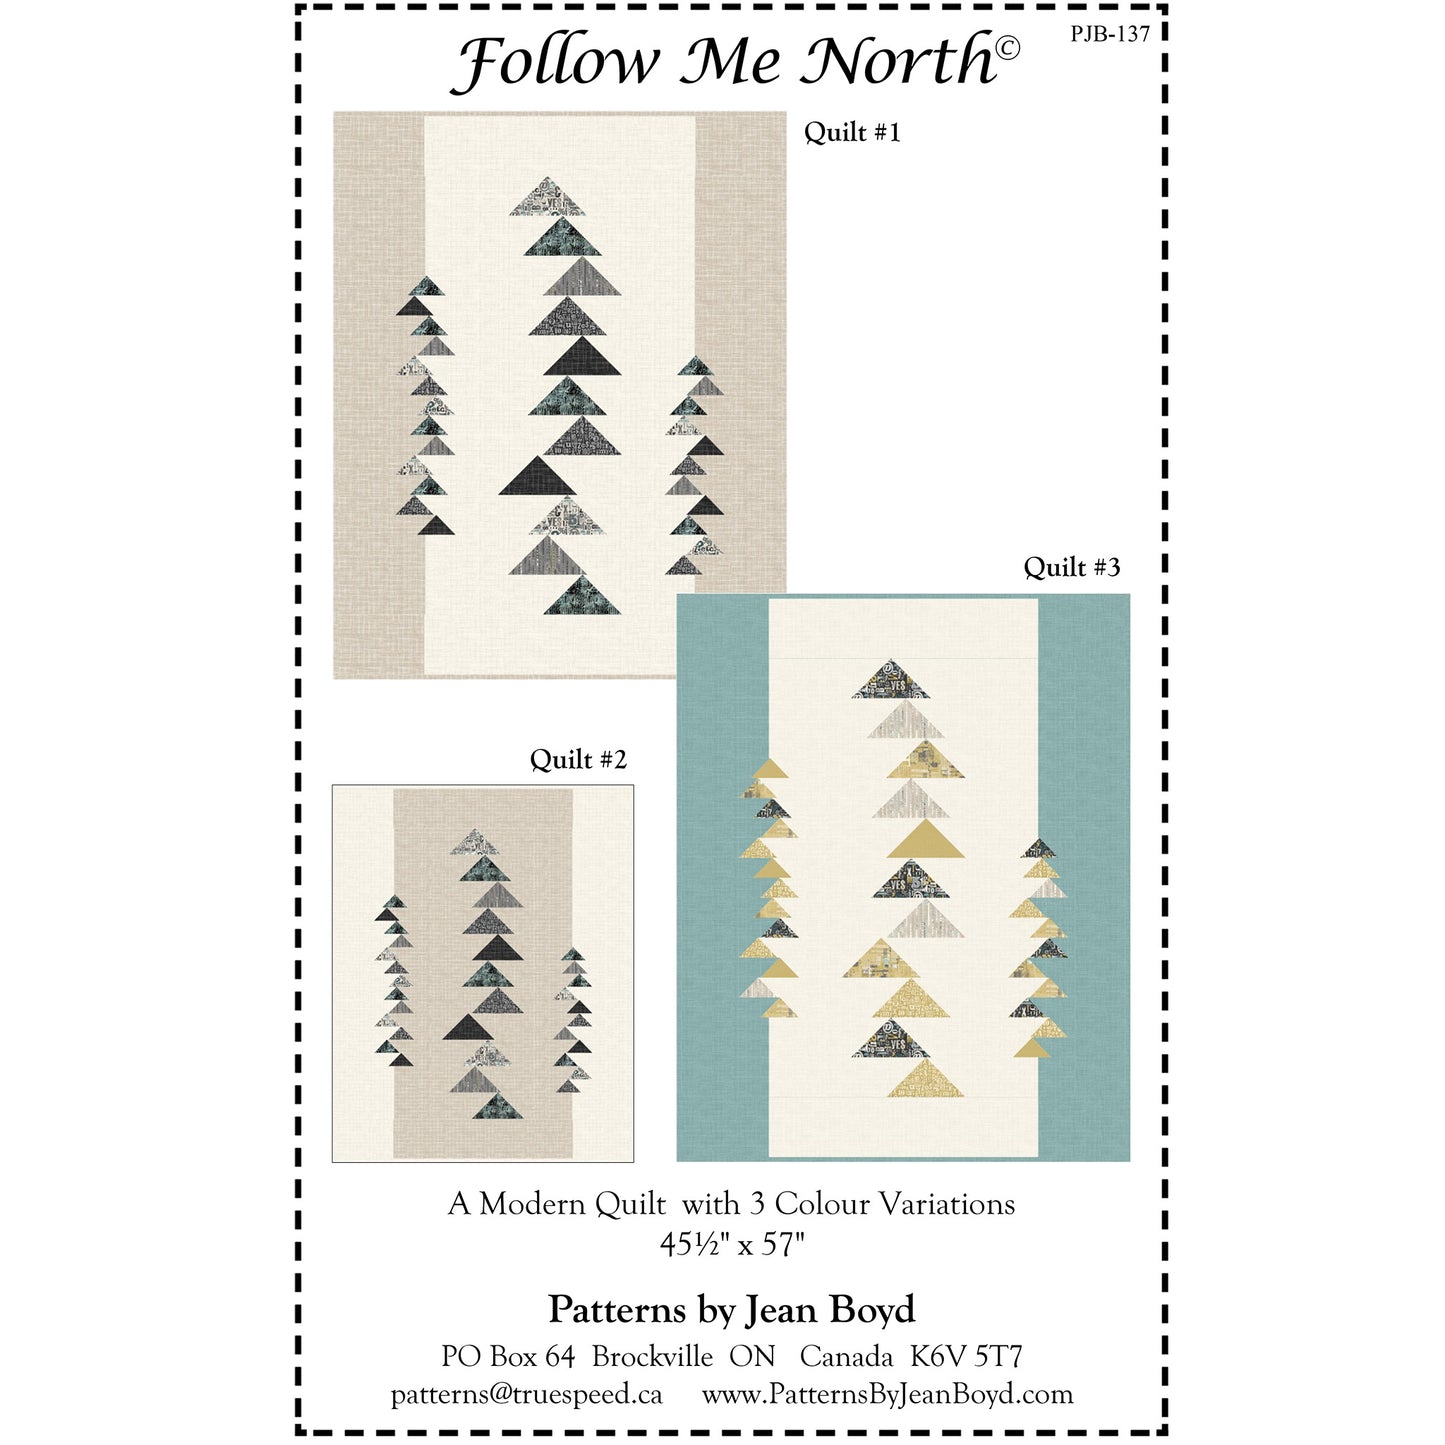 Cover image of pattern for Follow Me North Quilt.